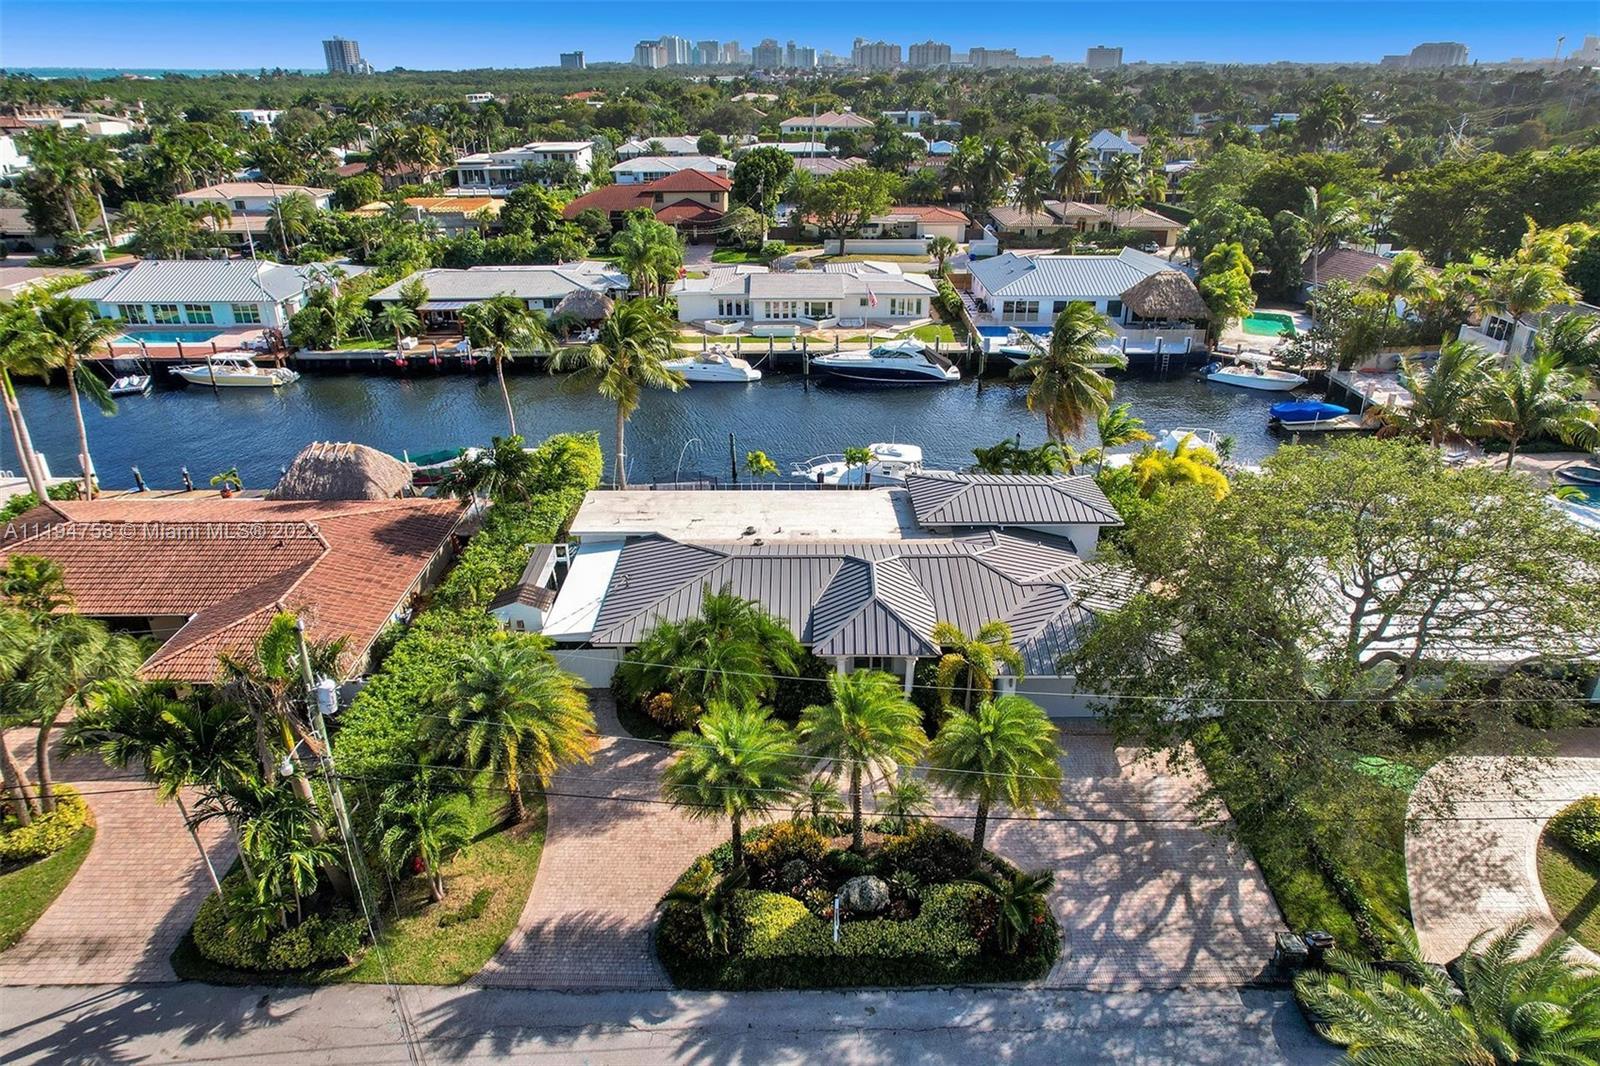 Modern Coral Ridge waterfront home with spectacular views of the coast. This boaters paradise includes impact windows & doors, porcelain 4x4 flooring, open kitchen & living areas overlooking the pool & canal, quartz countertops, long bar with designer backsplash, Viking appliances, LED lighting throughout, stone wall with LED electric fireplace, & custom lighting. The master suite includes direct water view with large walk in closet and bath. Exterior features new awning for carport, large 2 car garage with epoxy flooring, metal roof, 24x12 covered patio with high ceilings, light up bar with ice maker & beverage cooler, 11 car parking, pavers, 100' seawall, 30 ft dock, 2 dolphin pilings, & substantial tropical landscaping. Walk to the galleria mall, Bayview school and minutes to the beach.